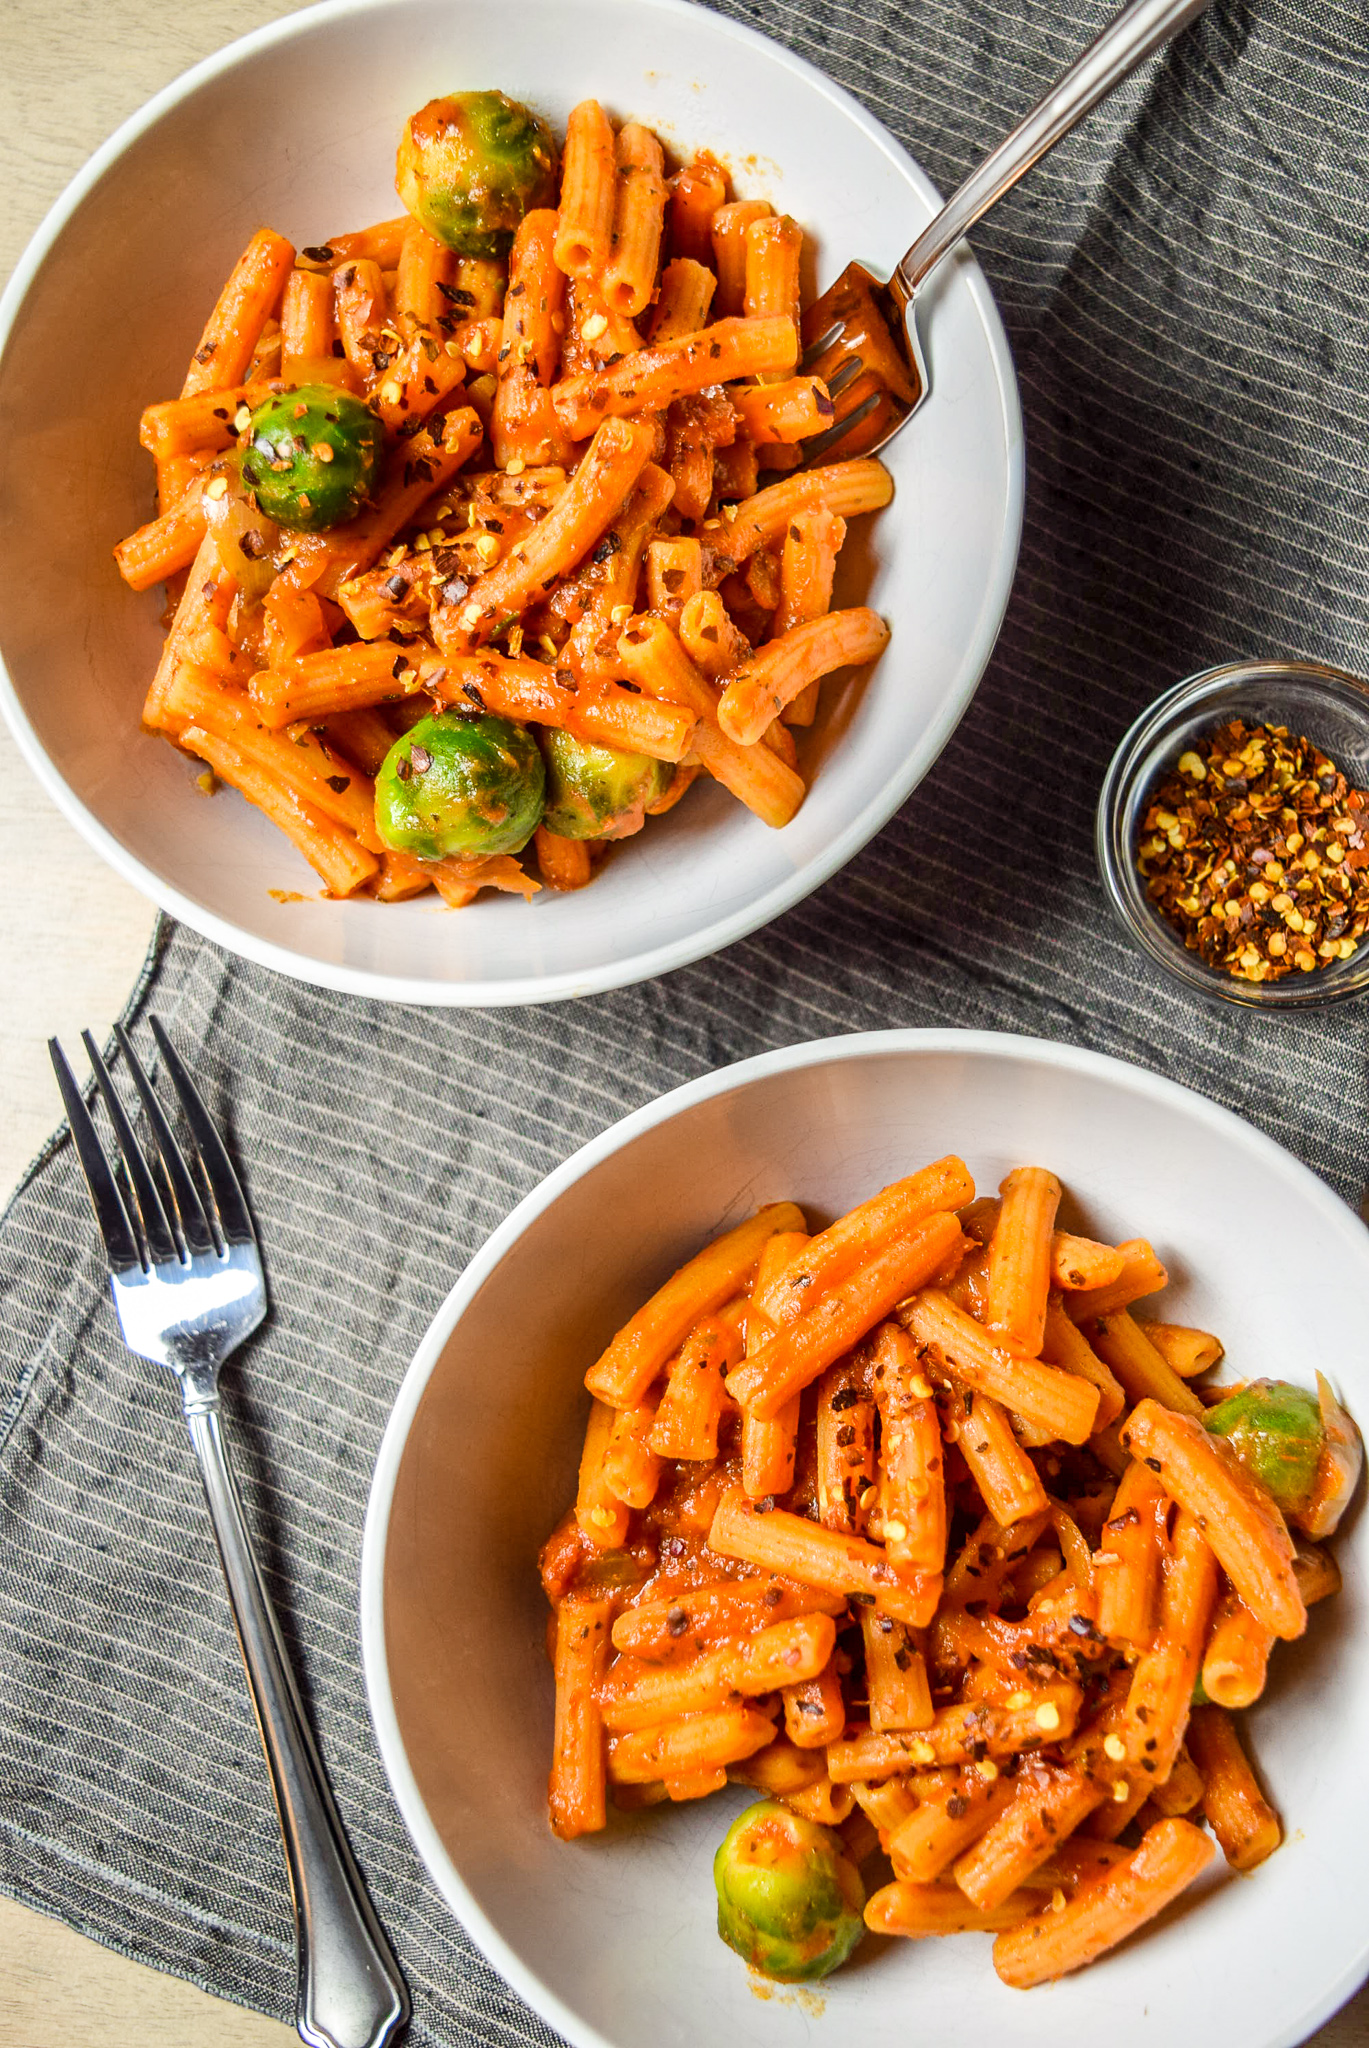 Finished Protein-Packed Red Lentil Pasta with Marinara, Brussel Sprouts, and Caramelized Onions in two bowls with forks, napkin, and chili pepper flakes from top